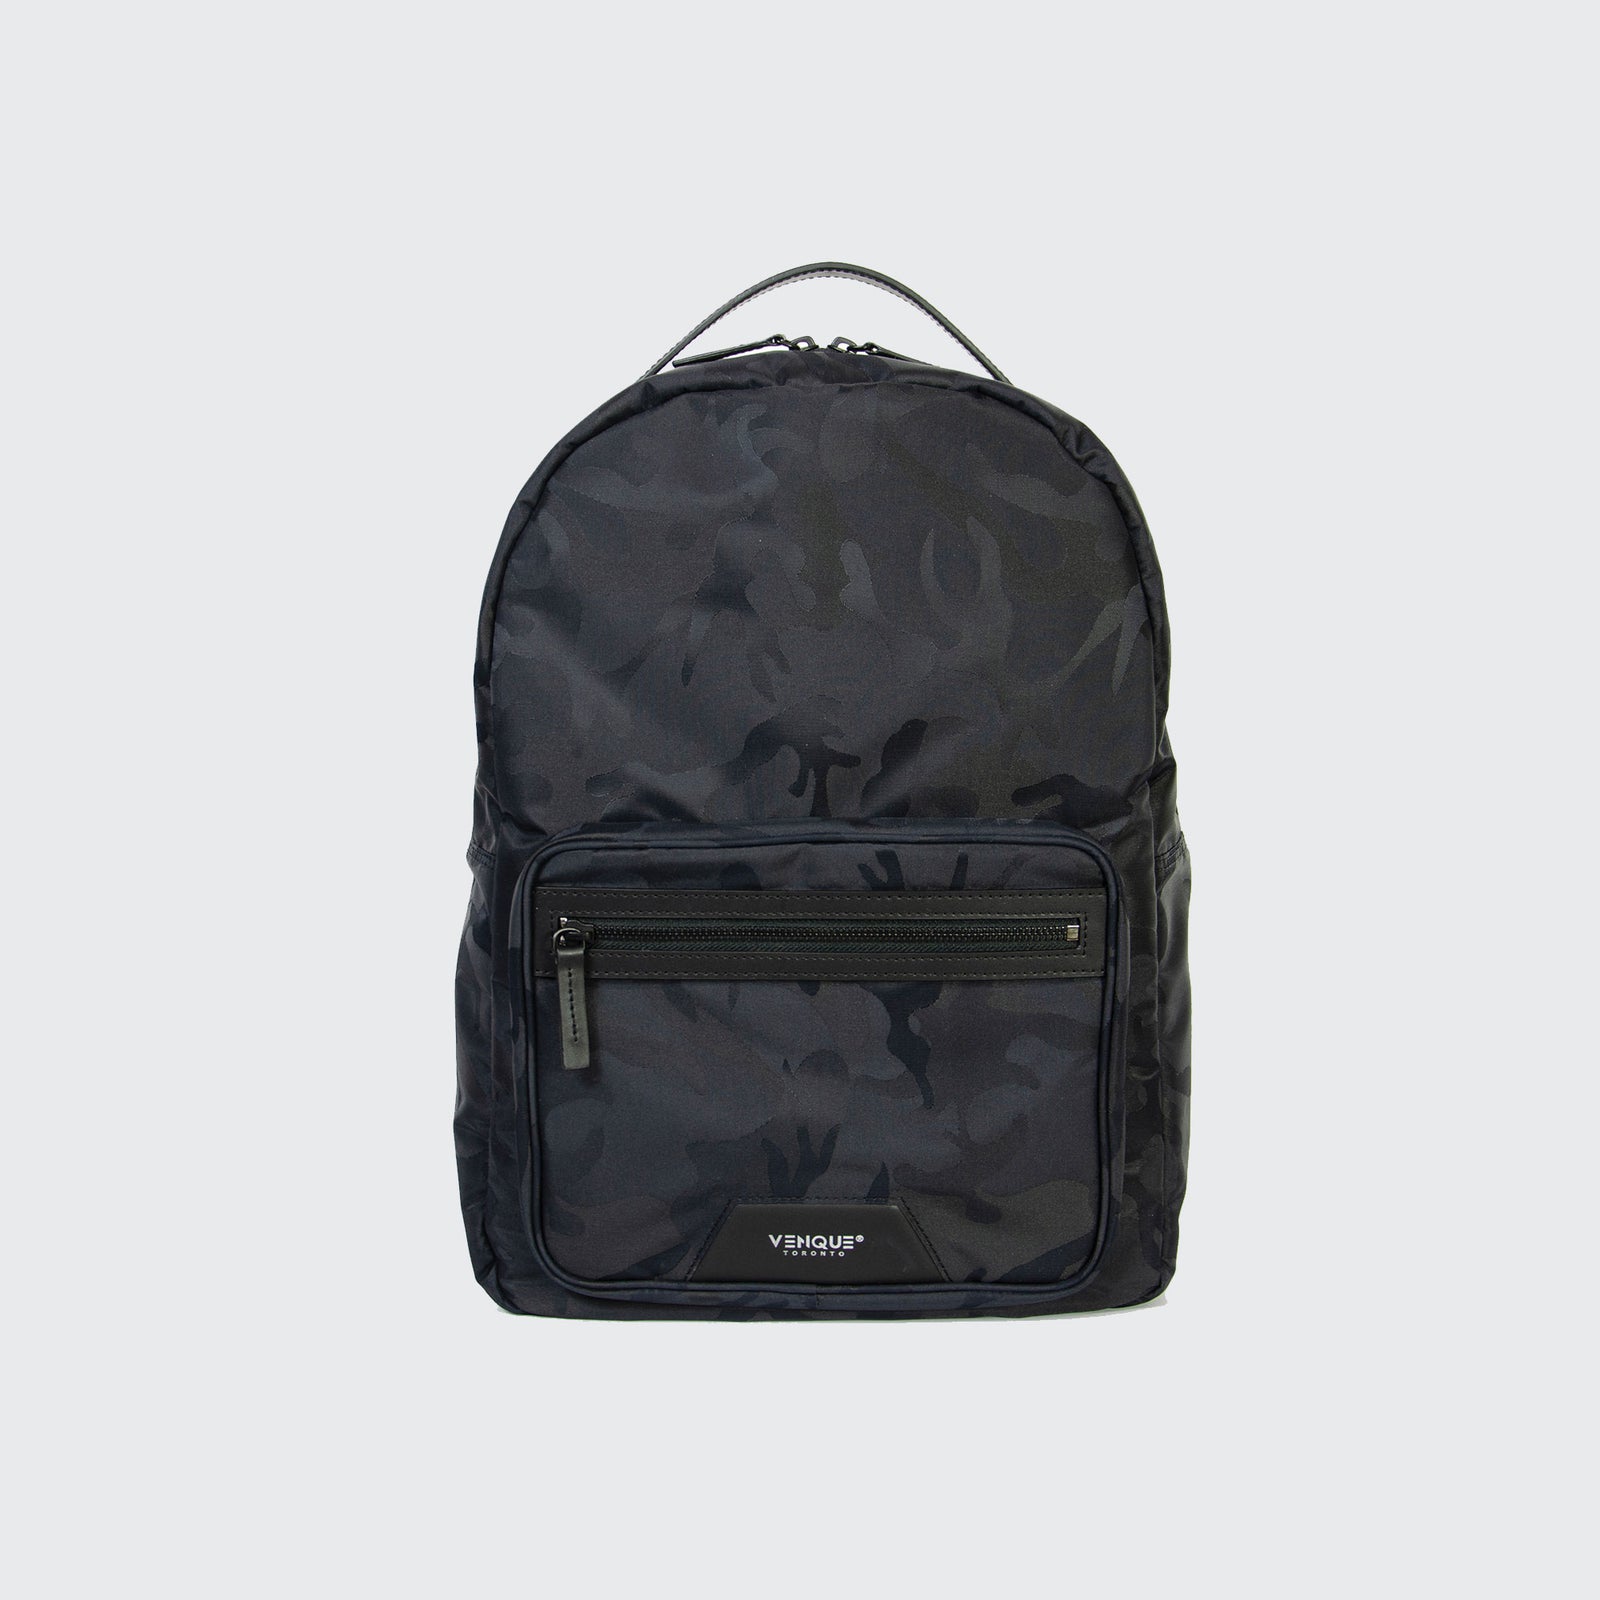 Shop All Kind of Backpacks for Travelling, Business and Street - VENQUE